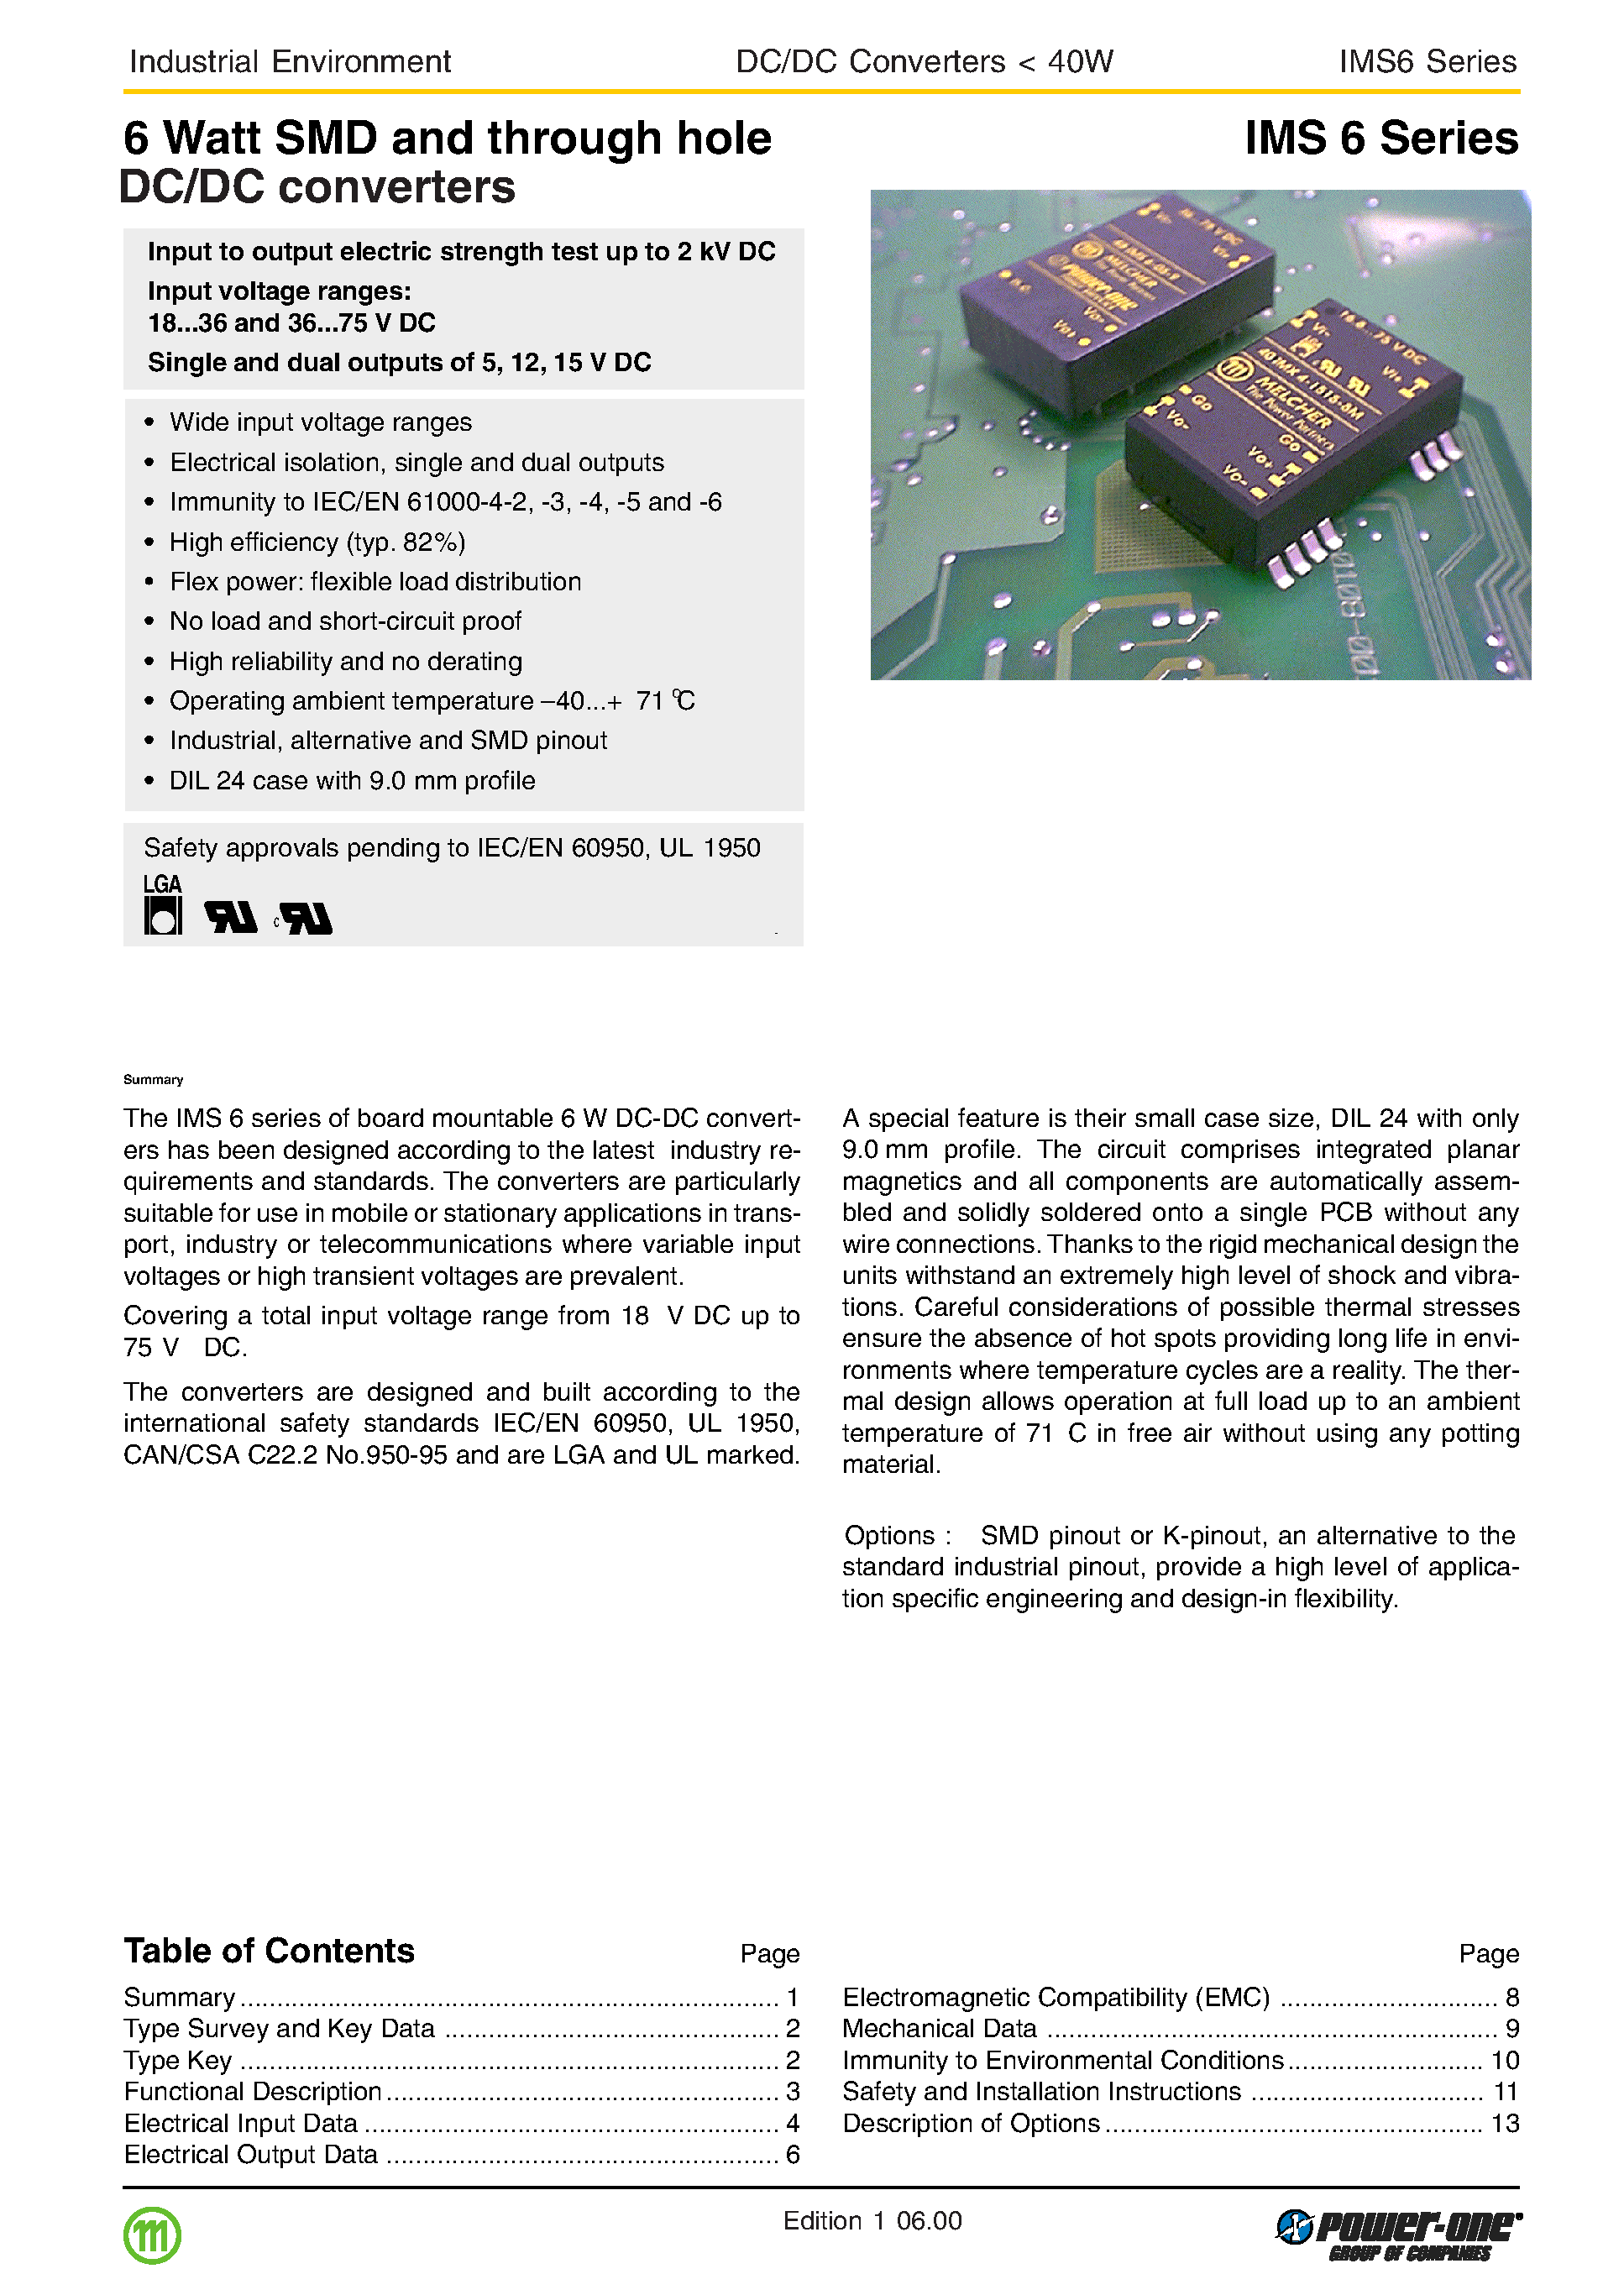 Datasheet 48IMS6-1515-9 - 6 Watt SMD and through hole DC/DC converters page 1